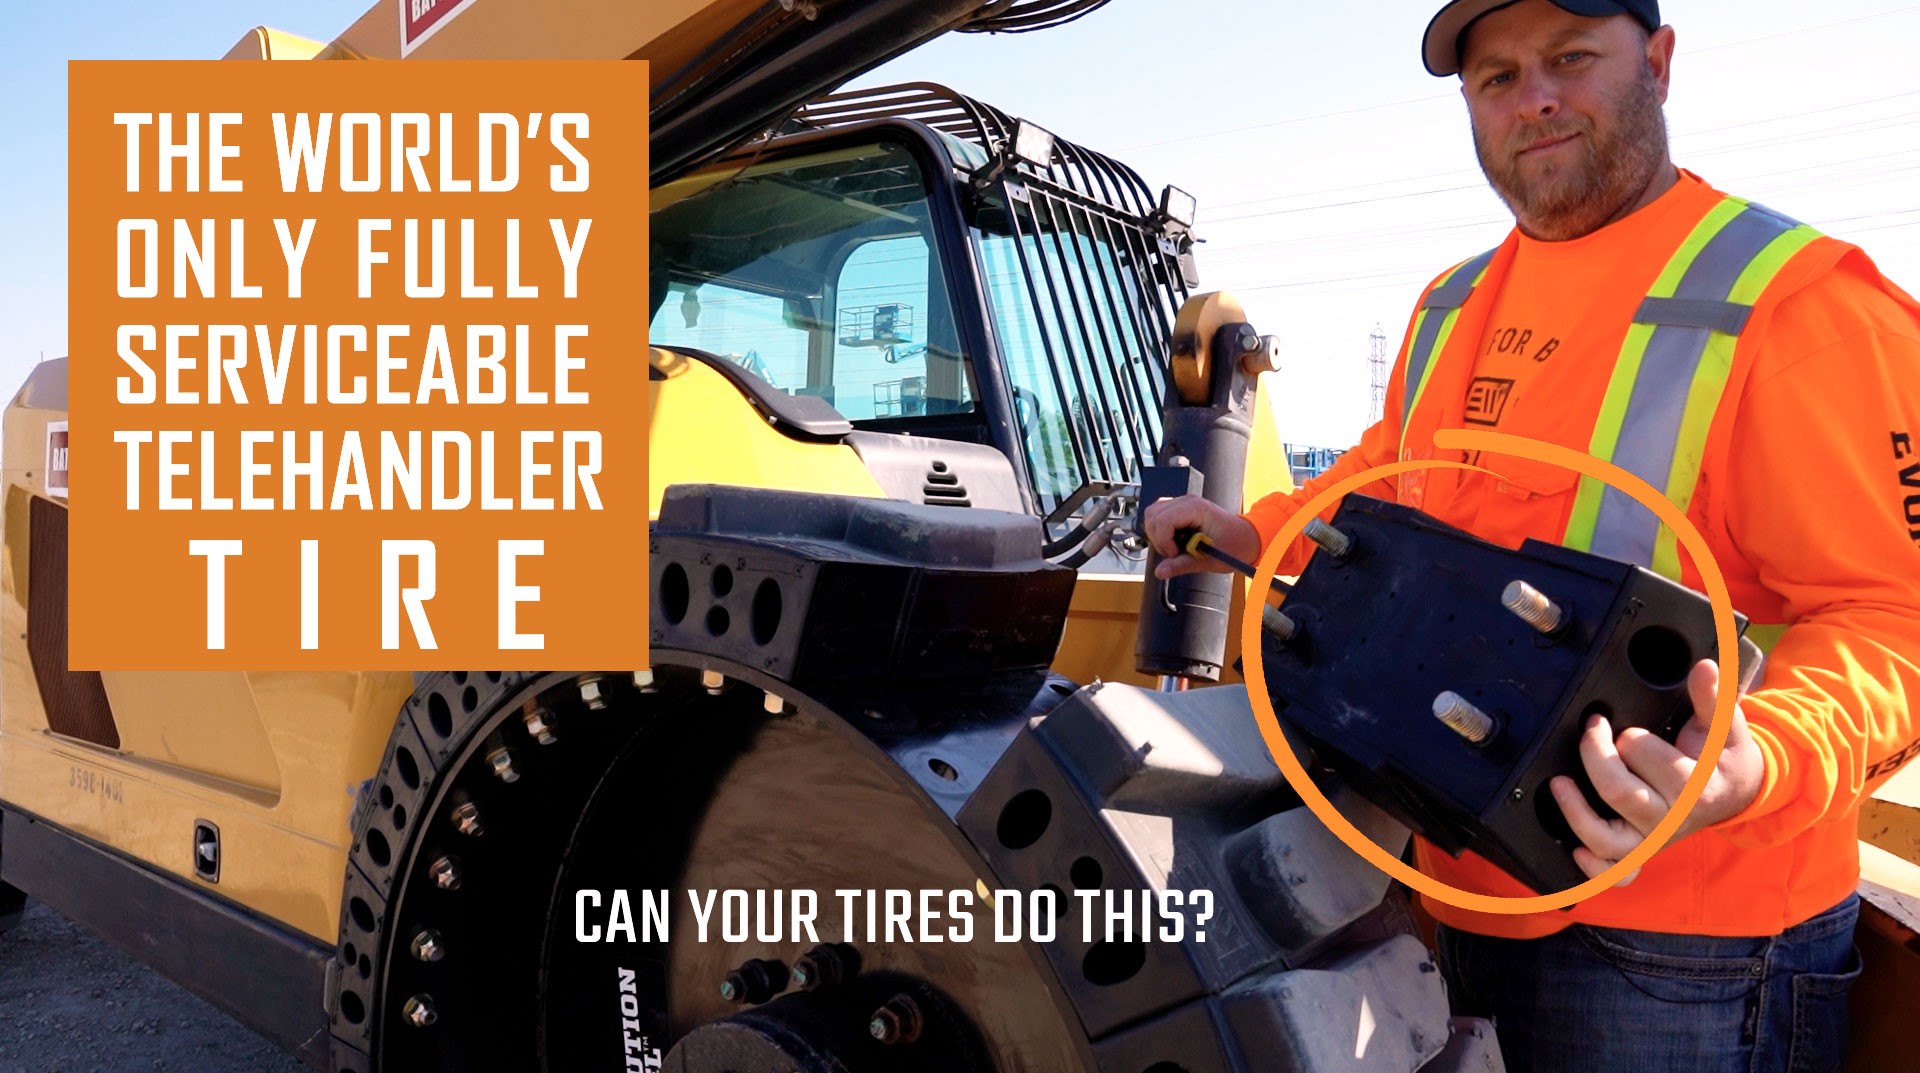 This video is about the world's only fully serviceable telehandler tire